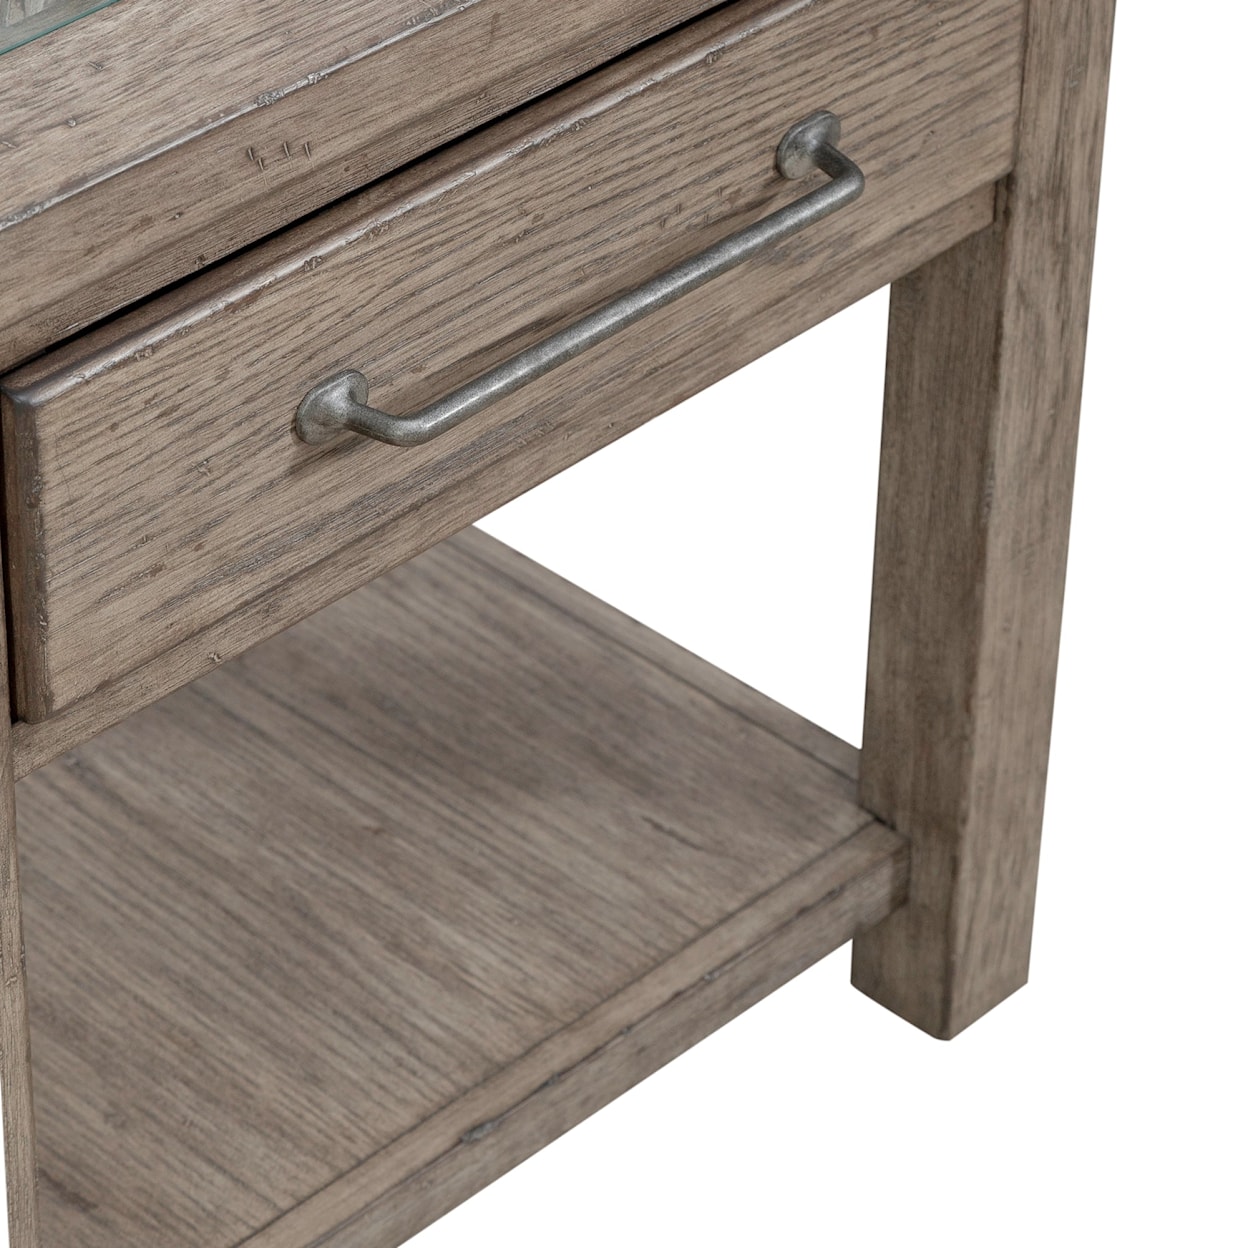 Liberty Furniture Skyview Lodge End Table